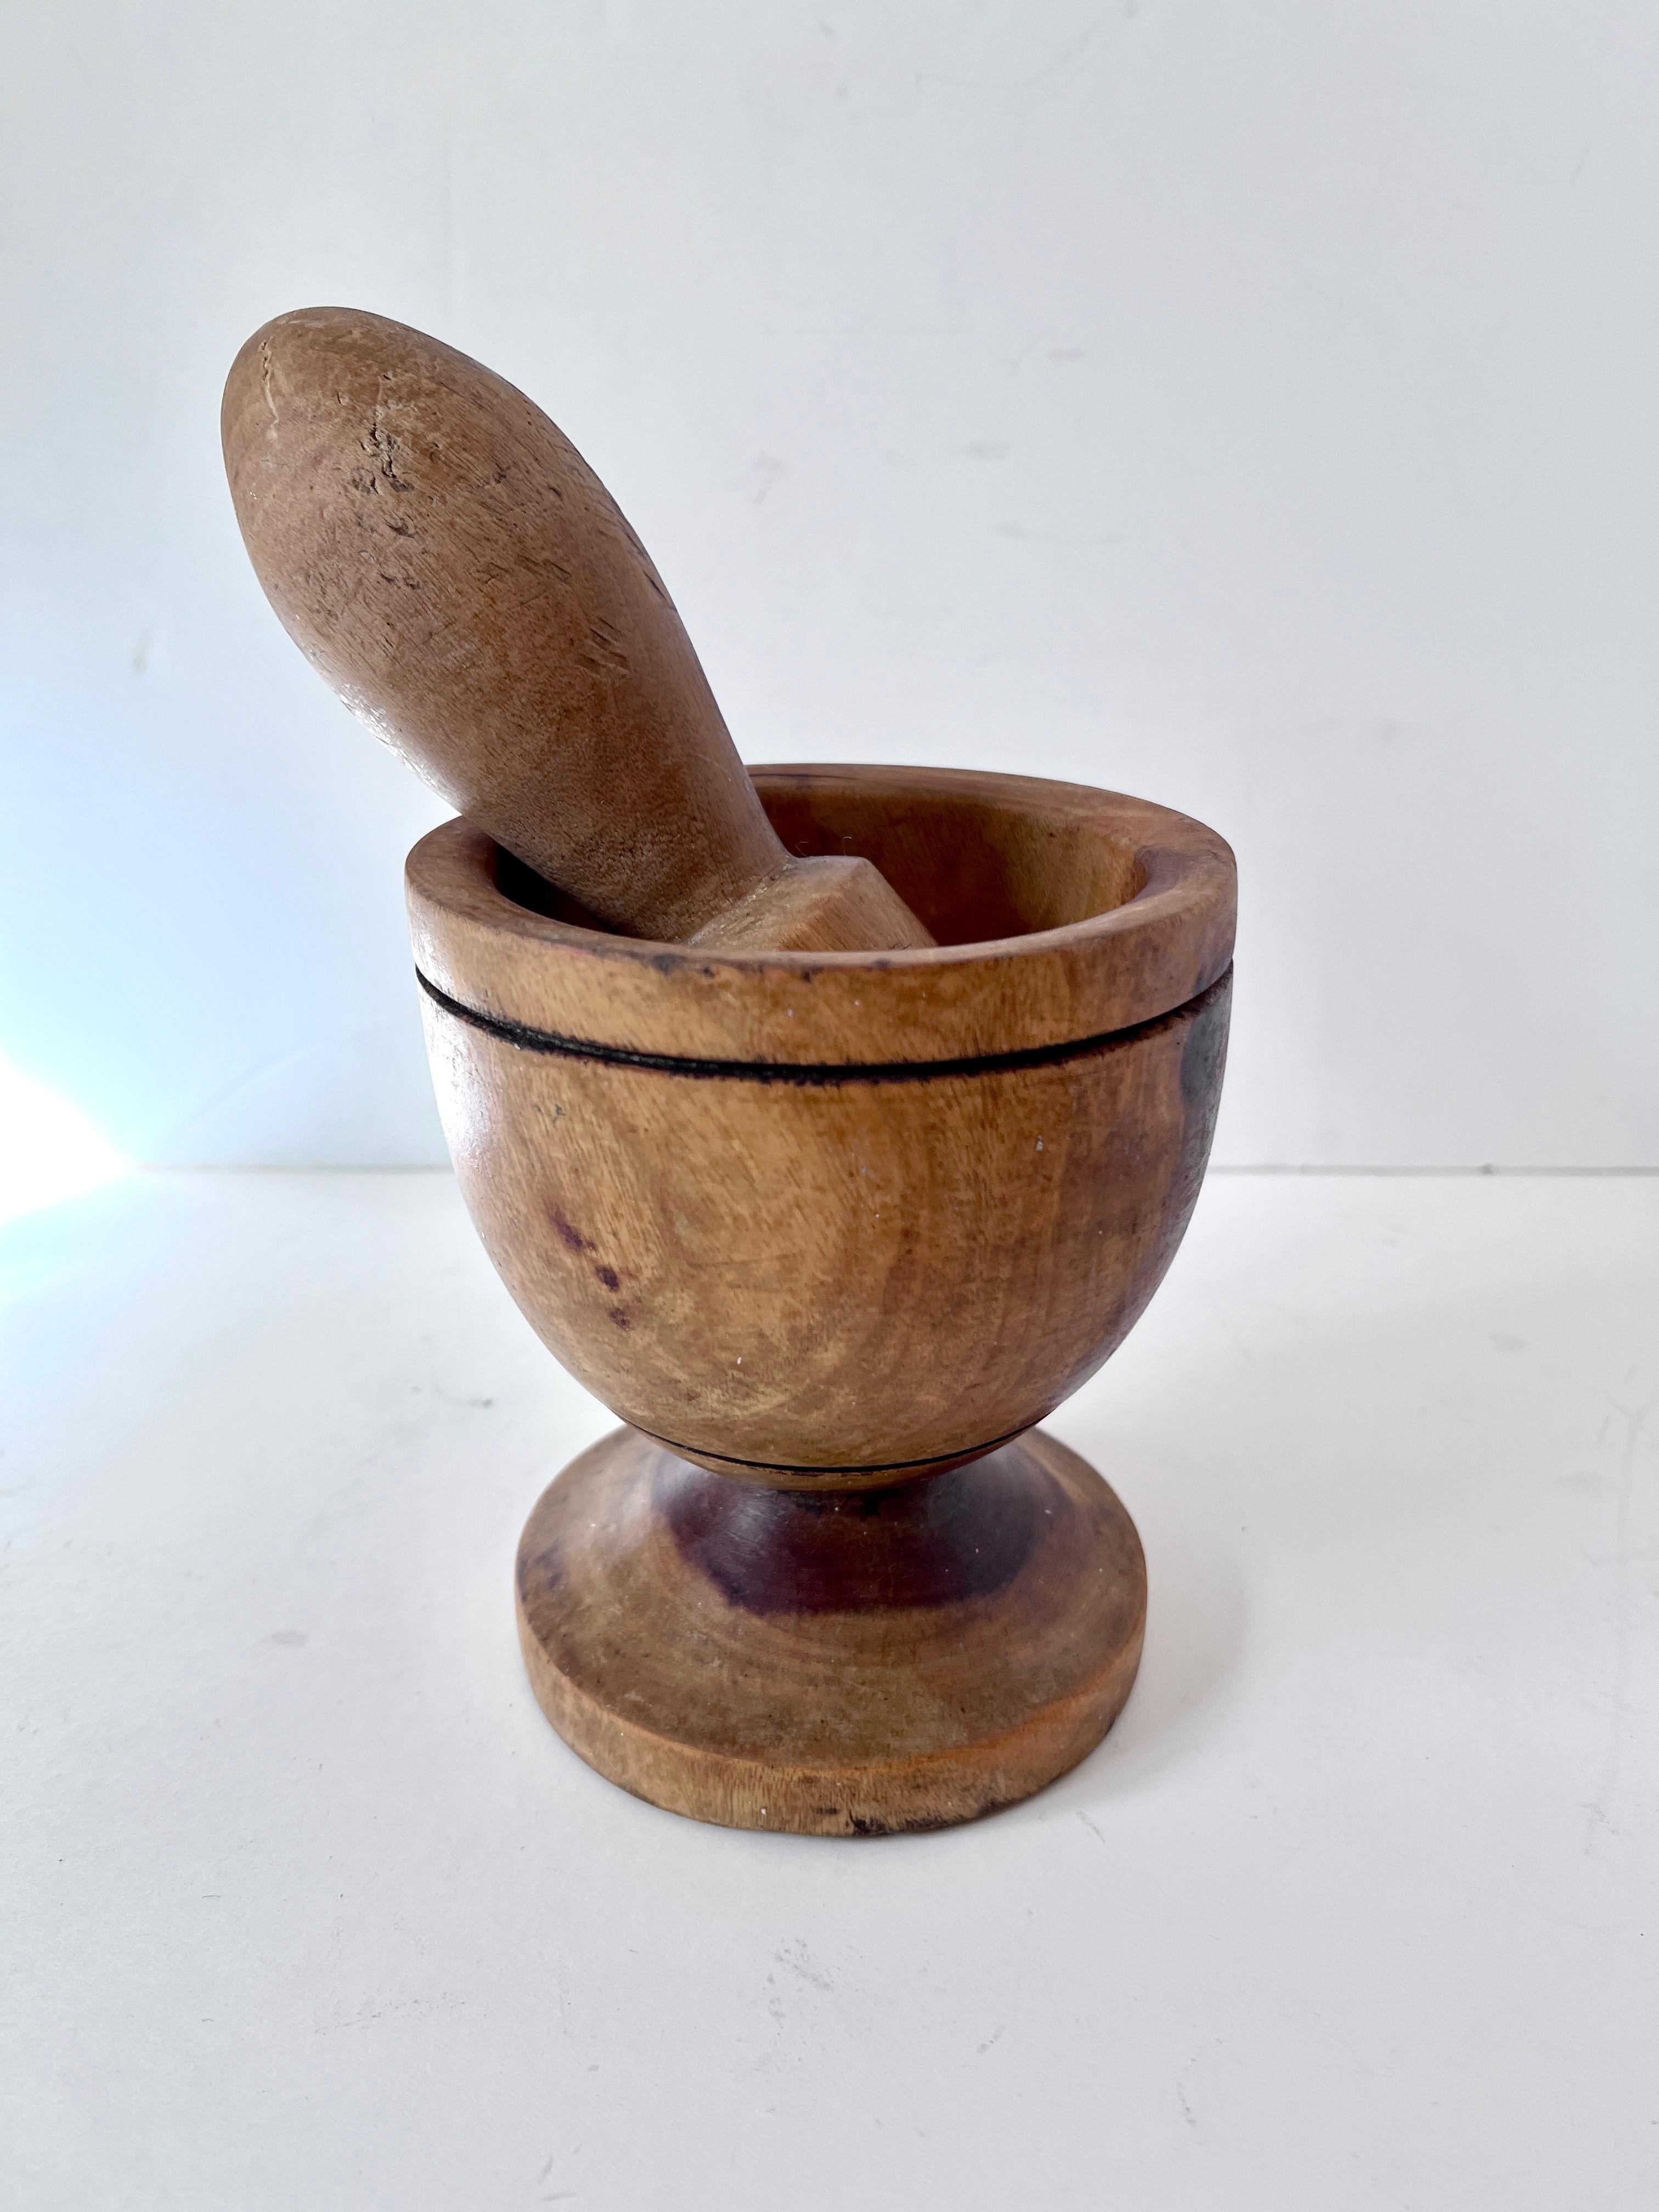 Folk Art Hand Crafted Wooden Mortar and Pestle For Sale